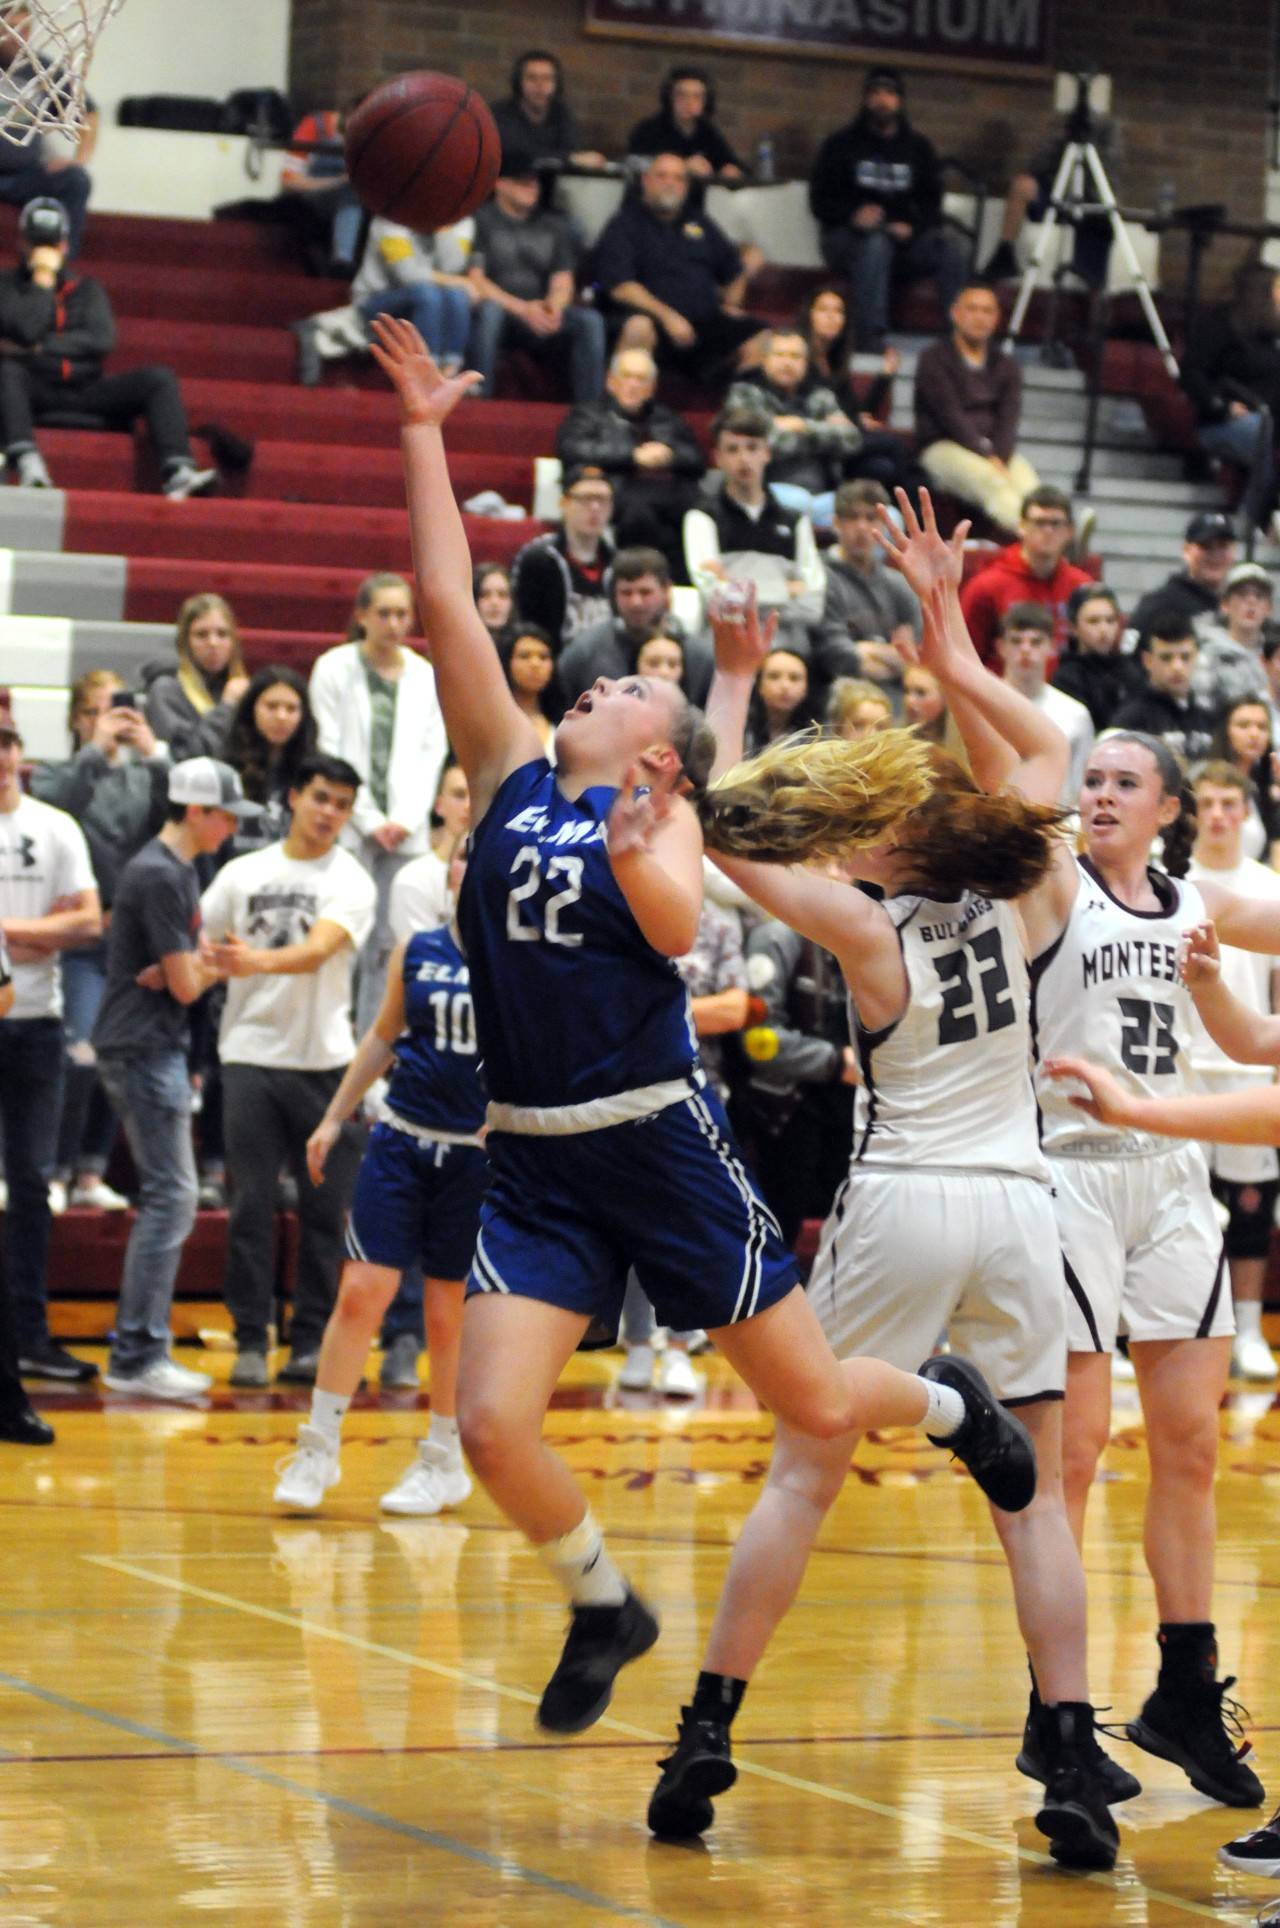 Elma’s Quin Mikel slices through the Montesano defense to score two of her nine points during a 12-2 run to end the first half in the Eagles’ 60-52 league-clinching victory on Friday in Montesano. (Ryan Sparks | Grays Harbor News Group)